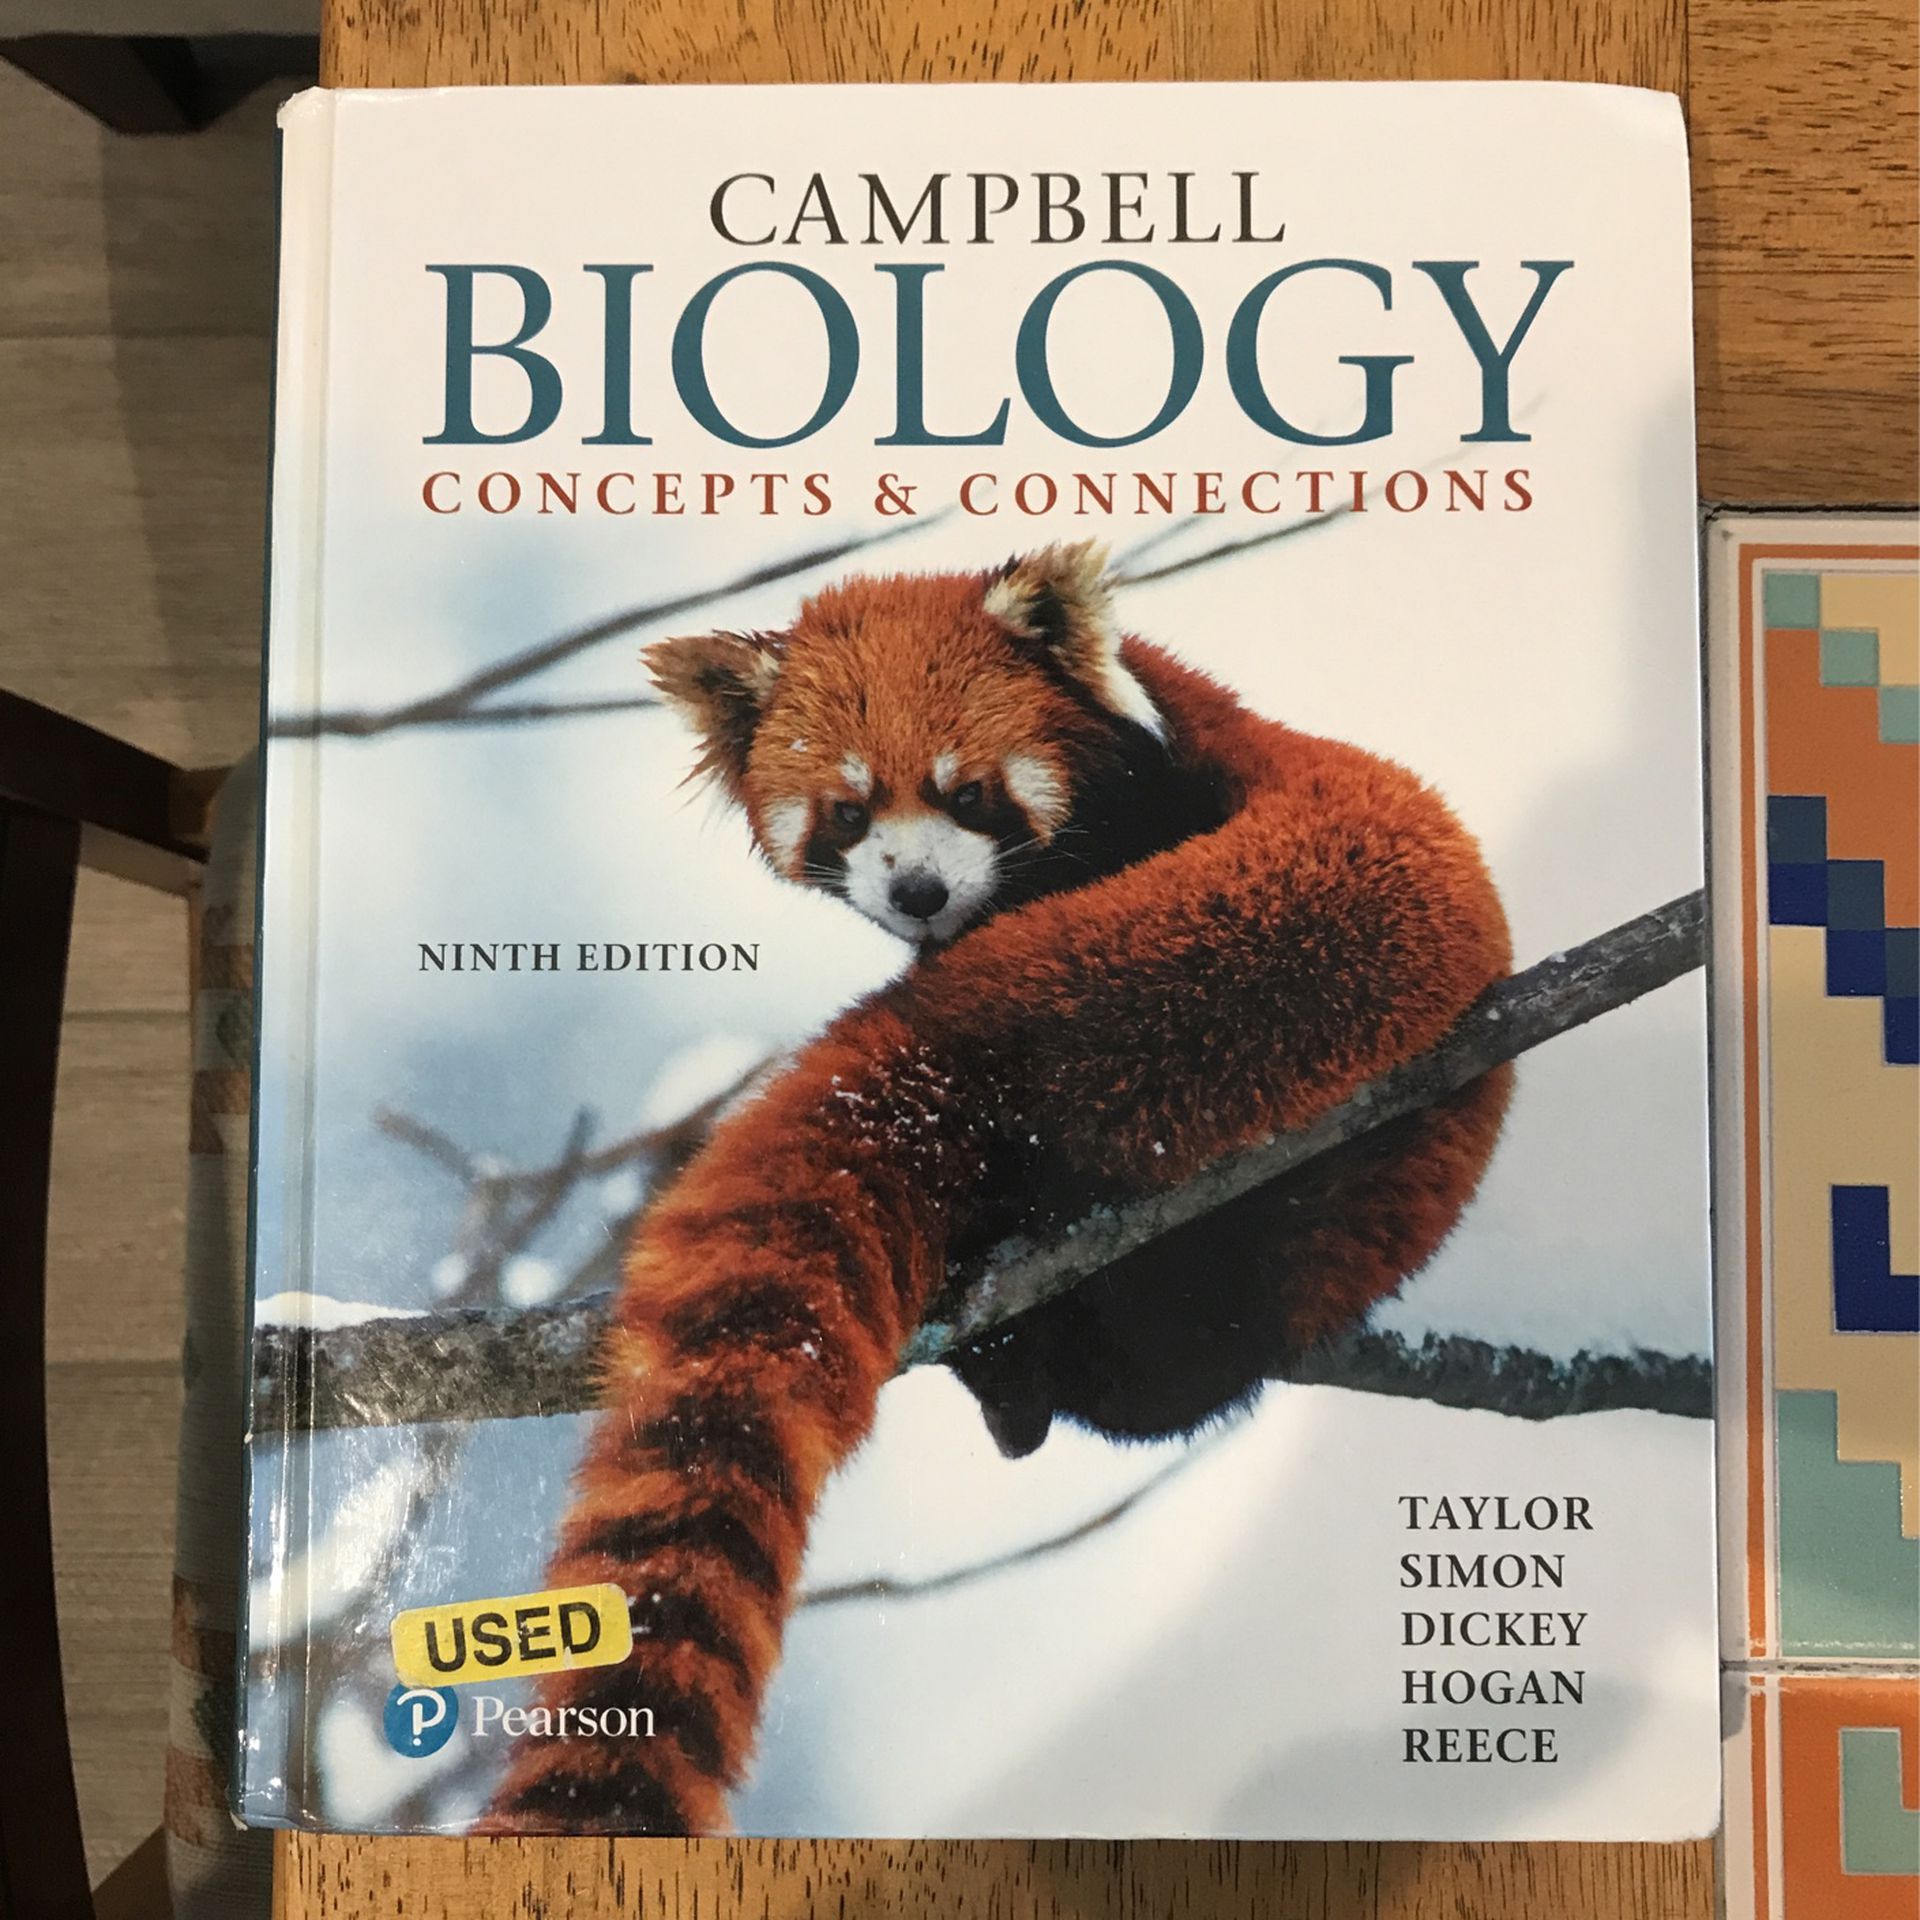 Campbell Biology Concepts & Connections 9th Edition